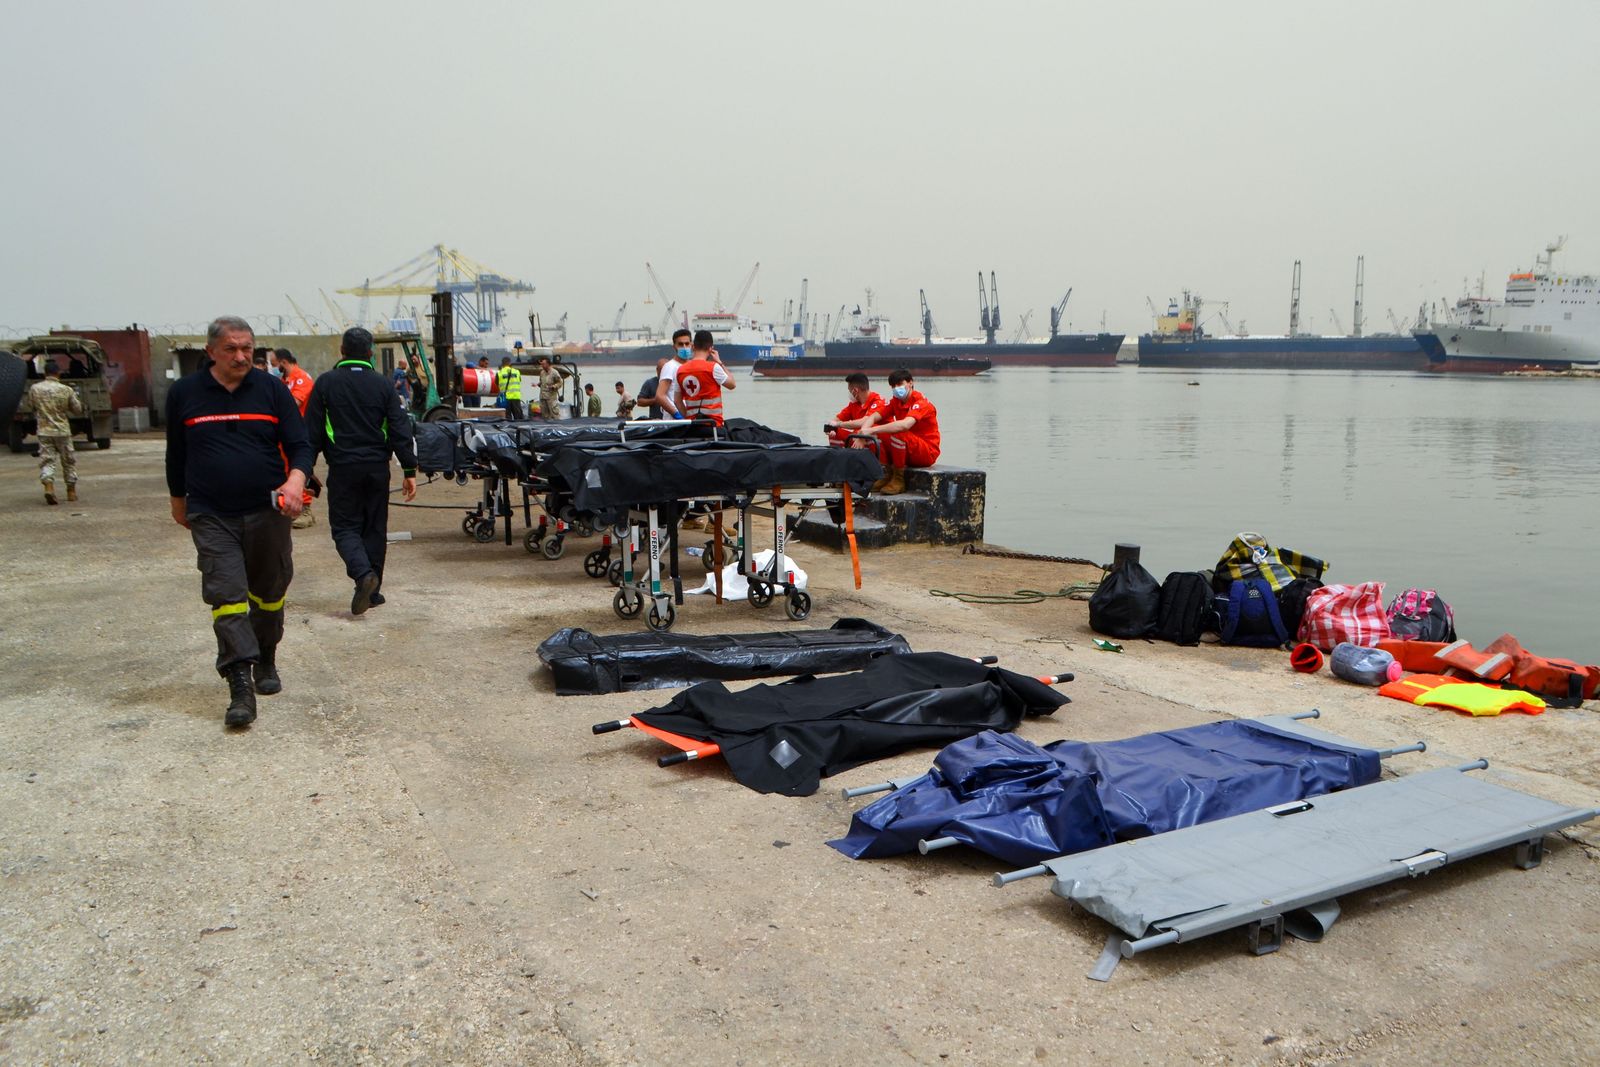 Medics wait on the pier as soldiers search for survivors off the coast of the northern Lebanese city of Tripoli on April 24, 2022, after an overloaded migrant boat capsized off north Lebanon during a chase by naval forces. - At least six people died, including a little girl, and almost 50 others were rescued after an overloaded migrant boat capsized off north Lebanon during a chase by naval forces, Lebanese officials said. (Photo by AFP) - AFP